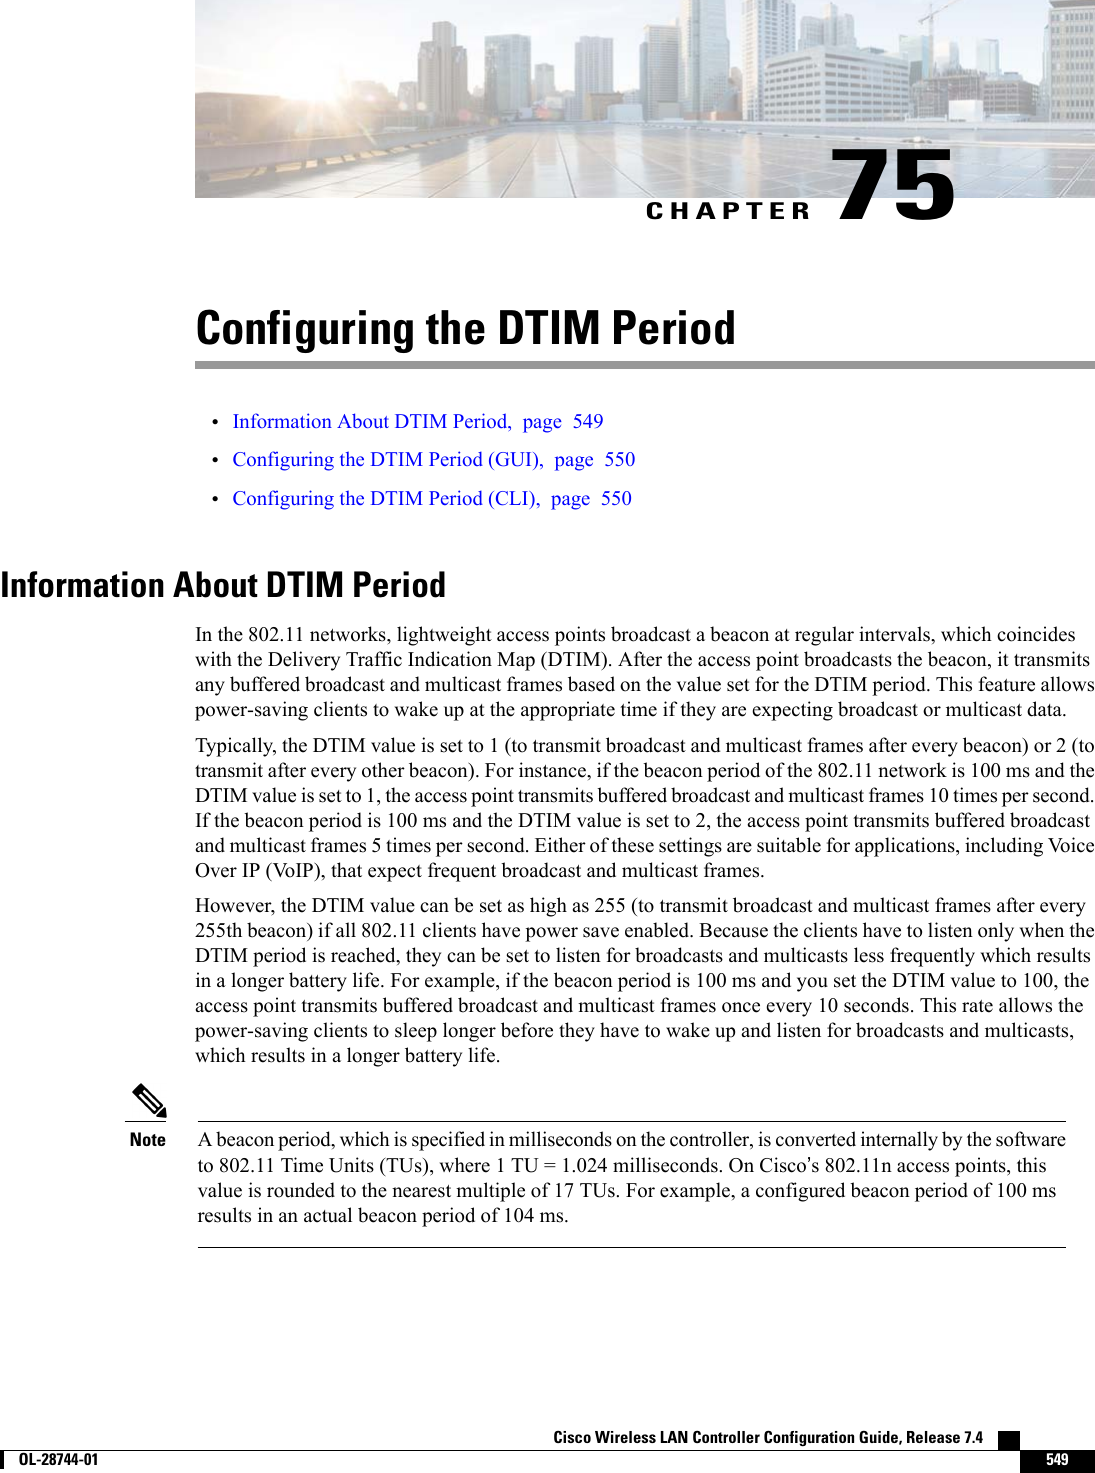 CHAPTER 75Configuring the DTIM Period•Information About DTIM Period, page 549•Configuring the DTIM Period (GUI), page 550•Configuring the DTIM Period (CLI), page 550Information About DTIM PeriodIn the 802.11 networks, lightweight access points broadcast a beacon at regular intervals, which coincideswith the Delivery Traffic Indication Map (DTIM). After the access point broadcasts the beacon, it transmitsany buffered broadcast and multicast frames based on the value set for the DTIM period. This feature allowspower-saving clients to wake up at the appropriate time if they are expecting broadcast or multicast data.Typically, the DTIM value is set to 1 (to transmit broadcast and multicast frames after every beacon) or 2 (totransmit after every other beacon). For instance, if the beacon period of the 802.11 network is 100 ms and theDTIM value is set to 1, the access point transmits buffered broadcast and multicast frames 10 times per second.If the beacon period is 100 ms and the DTIM value is set to 2, the access point transmits buffered broadcastand multicast frames 5 times per second. Either of these settings are suitable for applications, including VoiceOver IP (VoIP), that expect frequent broadcast and multicast frames.However, the DTIM value can be set as high as 255 (to transmit broadcast and multicast frames after every255th beacon) if all 802.11 clients have power save enabled. Because the clients have to listen only when theDTIM period is reached, they can be set to listen for broadcasts and multicasts less frequently which resultsin a longer battery life. For example, if the beacon period is 100 ms and you set the DTIM value to 100, theaccess point transmits buffered broadcast and multicast frames once every 10 seconds. This rate allows thepower-saving clients to sleep longer before they have to wake up and listen for broadcasts and multicasts,which results in a longer battery life.A beacon period, which is specified in milliseconds on the controller, is converted internally by the softwareto 802.11 Time Units (TUs), where 1 TU = 1.024 milliseconds. On Cisco’s 802.11n access points, thisvalue is rounded to the nearest multiple of 17 TUs. For example, a configured beacon period of 100 msresults in an actual beacon period of 104 ms.NoteCisco Wireless LAN Controller Configuration Guide, Release 7.4        OL-28744-01 549